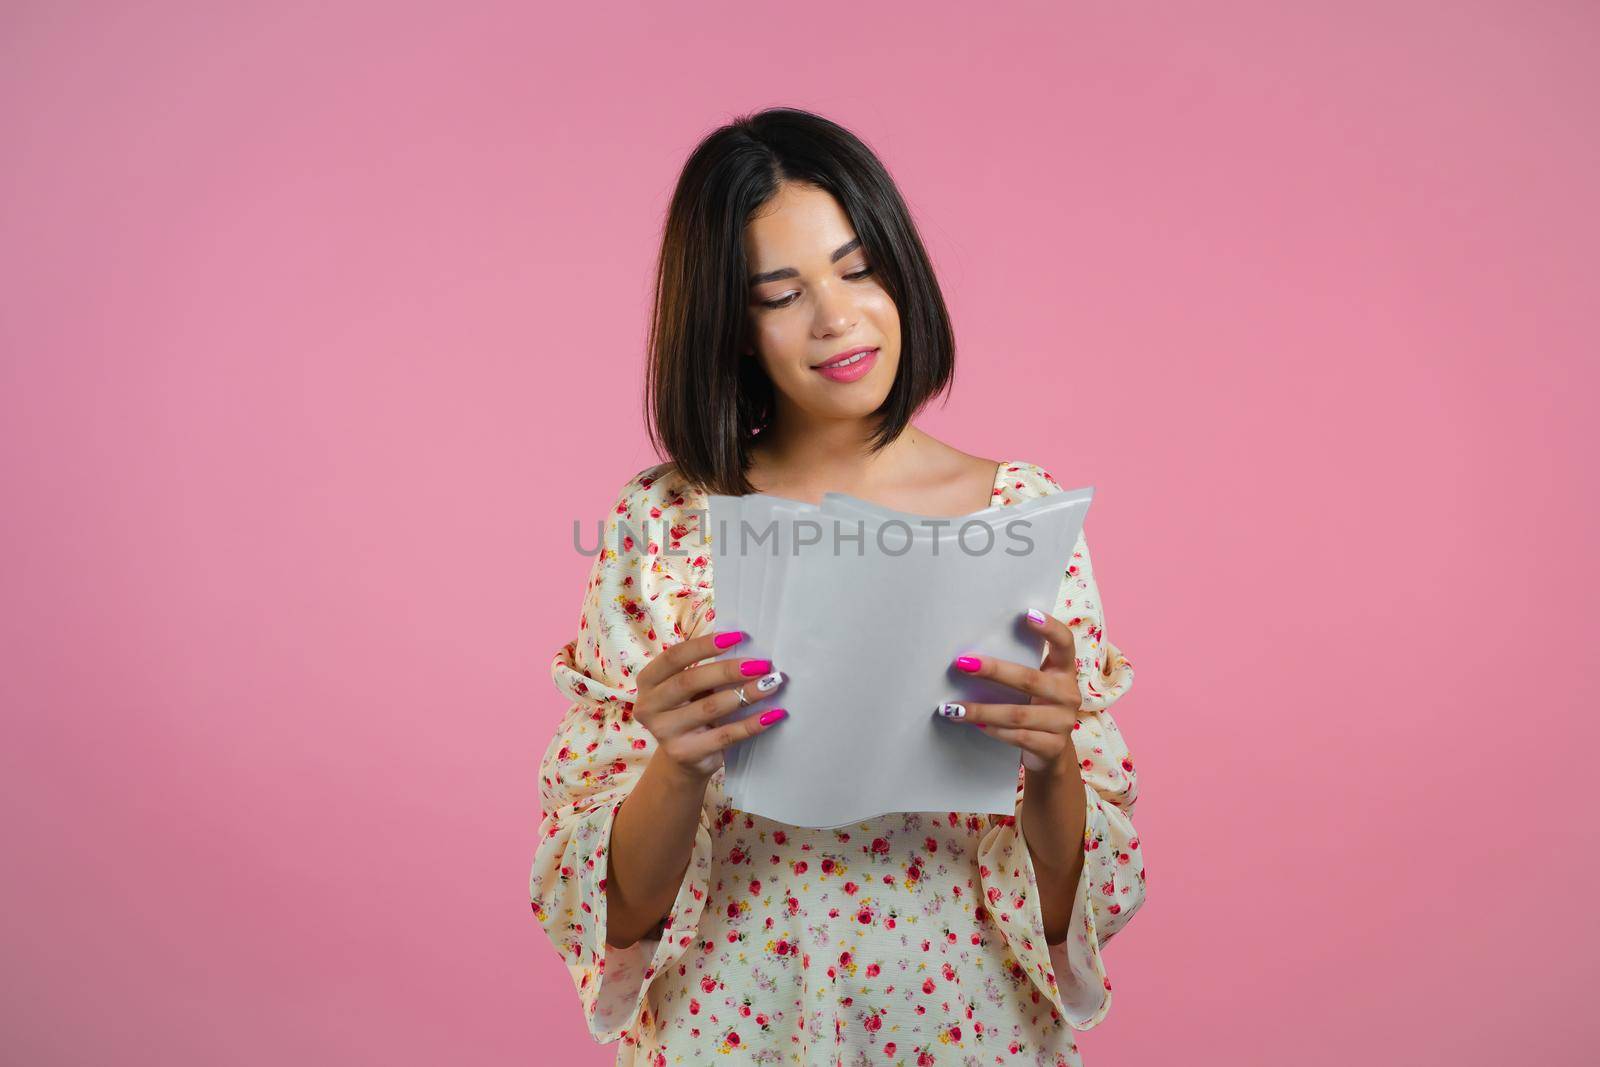 Satisfied woman in floral dress holding files papers isolated on pink background. Pretty girl checks documents, utility bills. by kristina_kokhanova